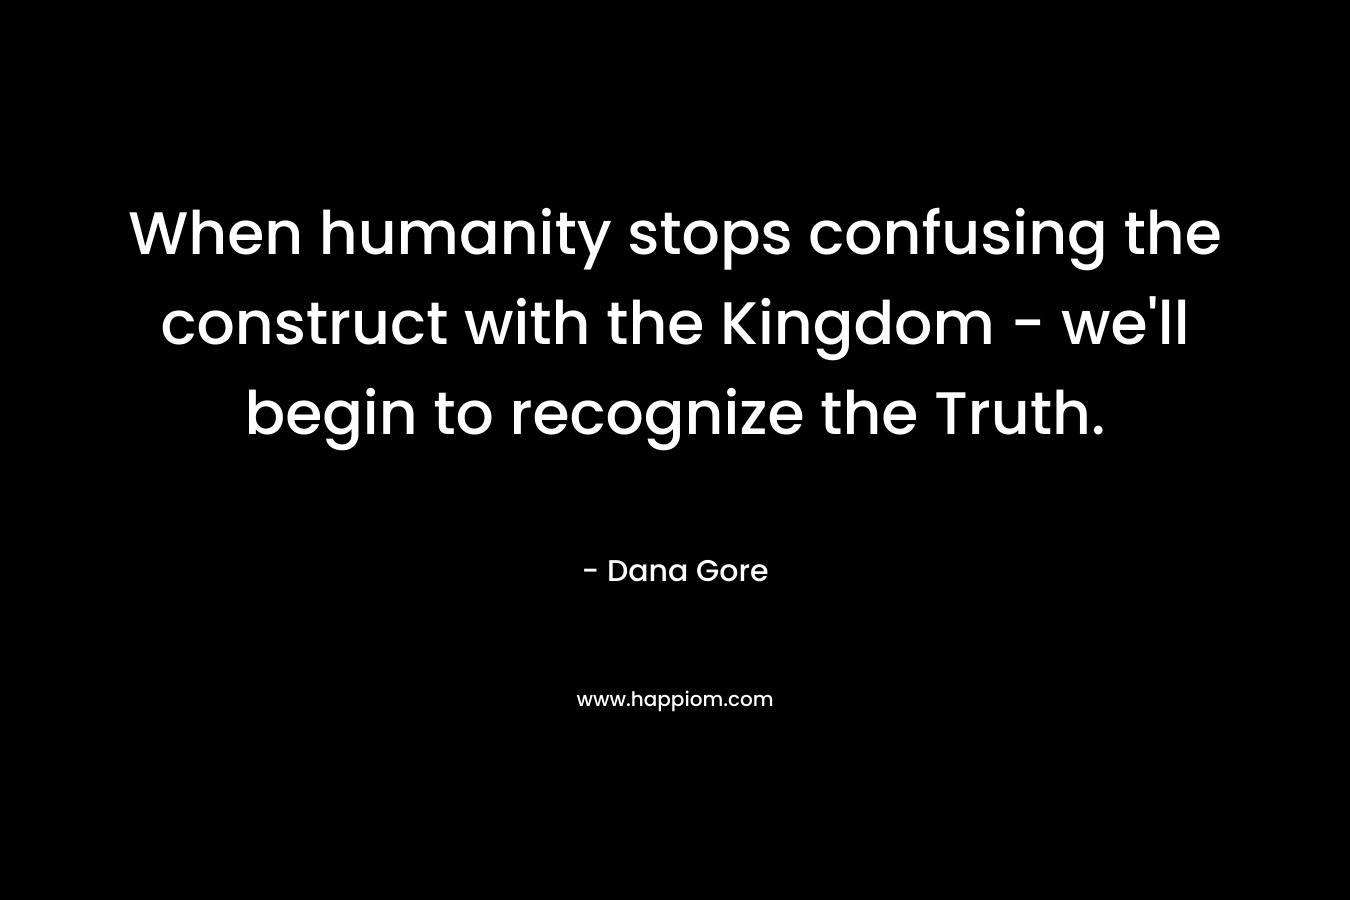 When humanity stops confusing the construct with the Kingdom - we'll begin to recognize the Truth.